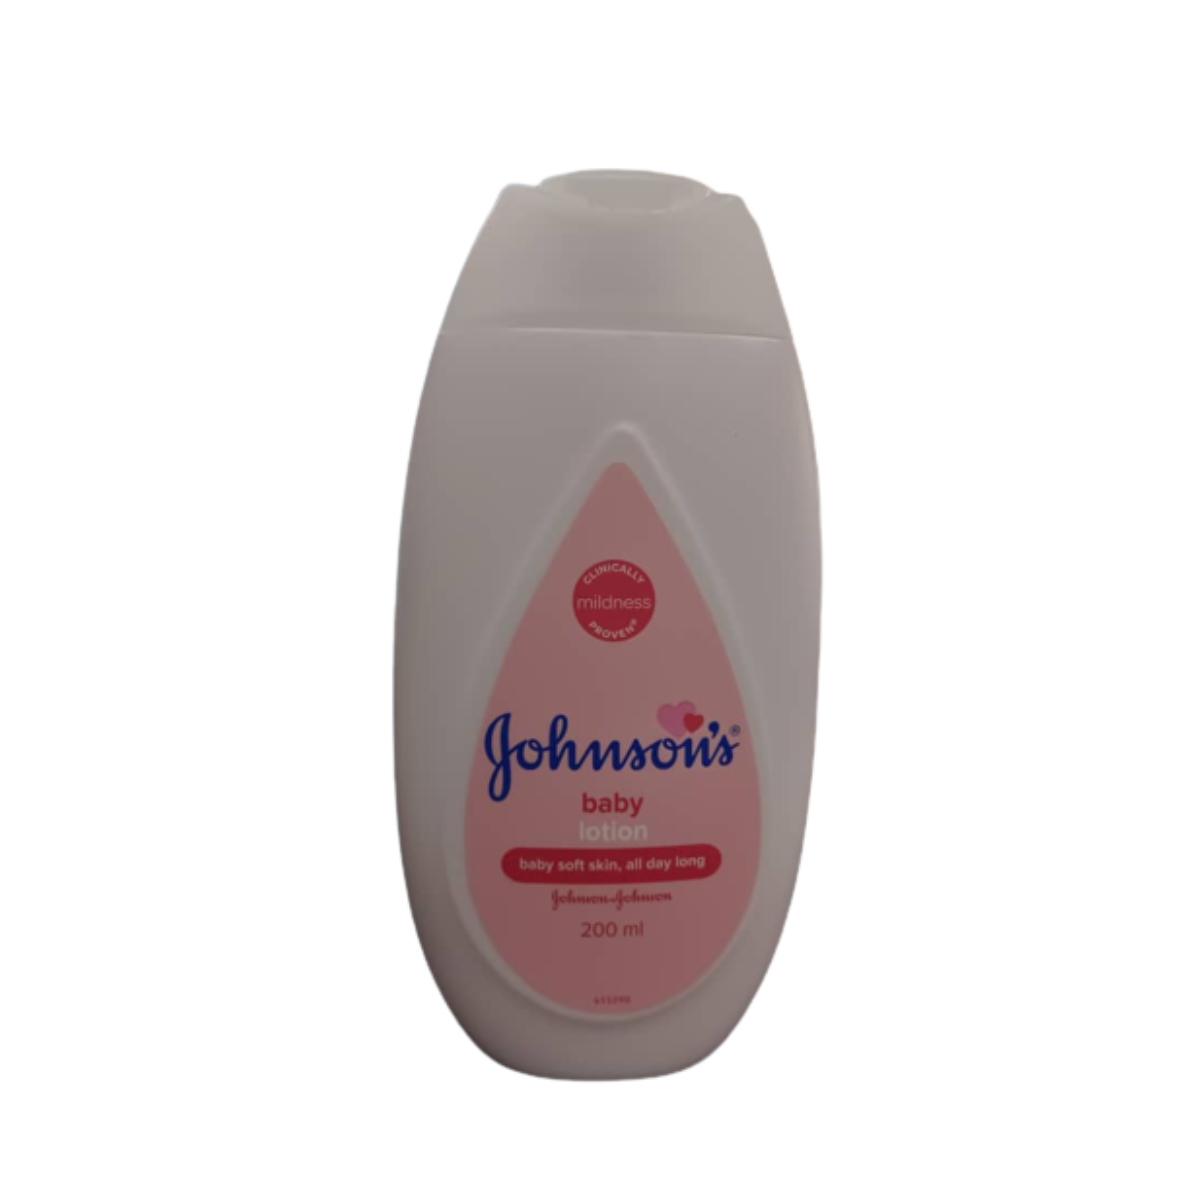 Johnson's Baby Lotion - Baby Soft Skin - All Day Long - 200ml